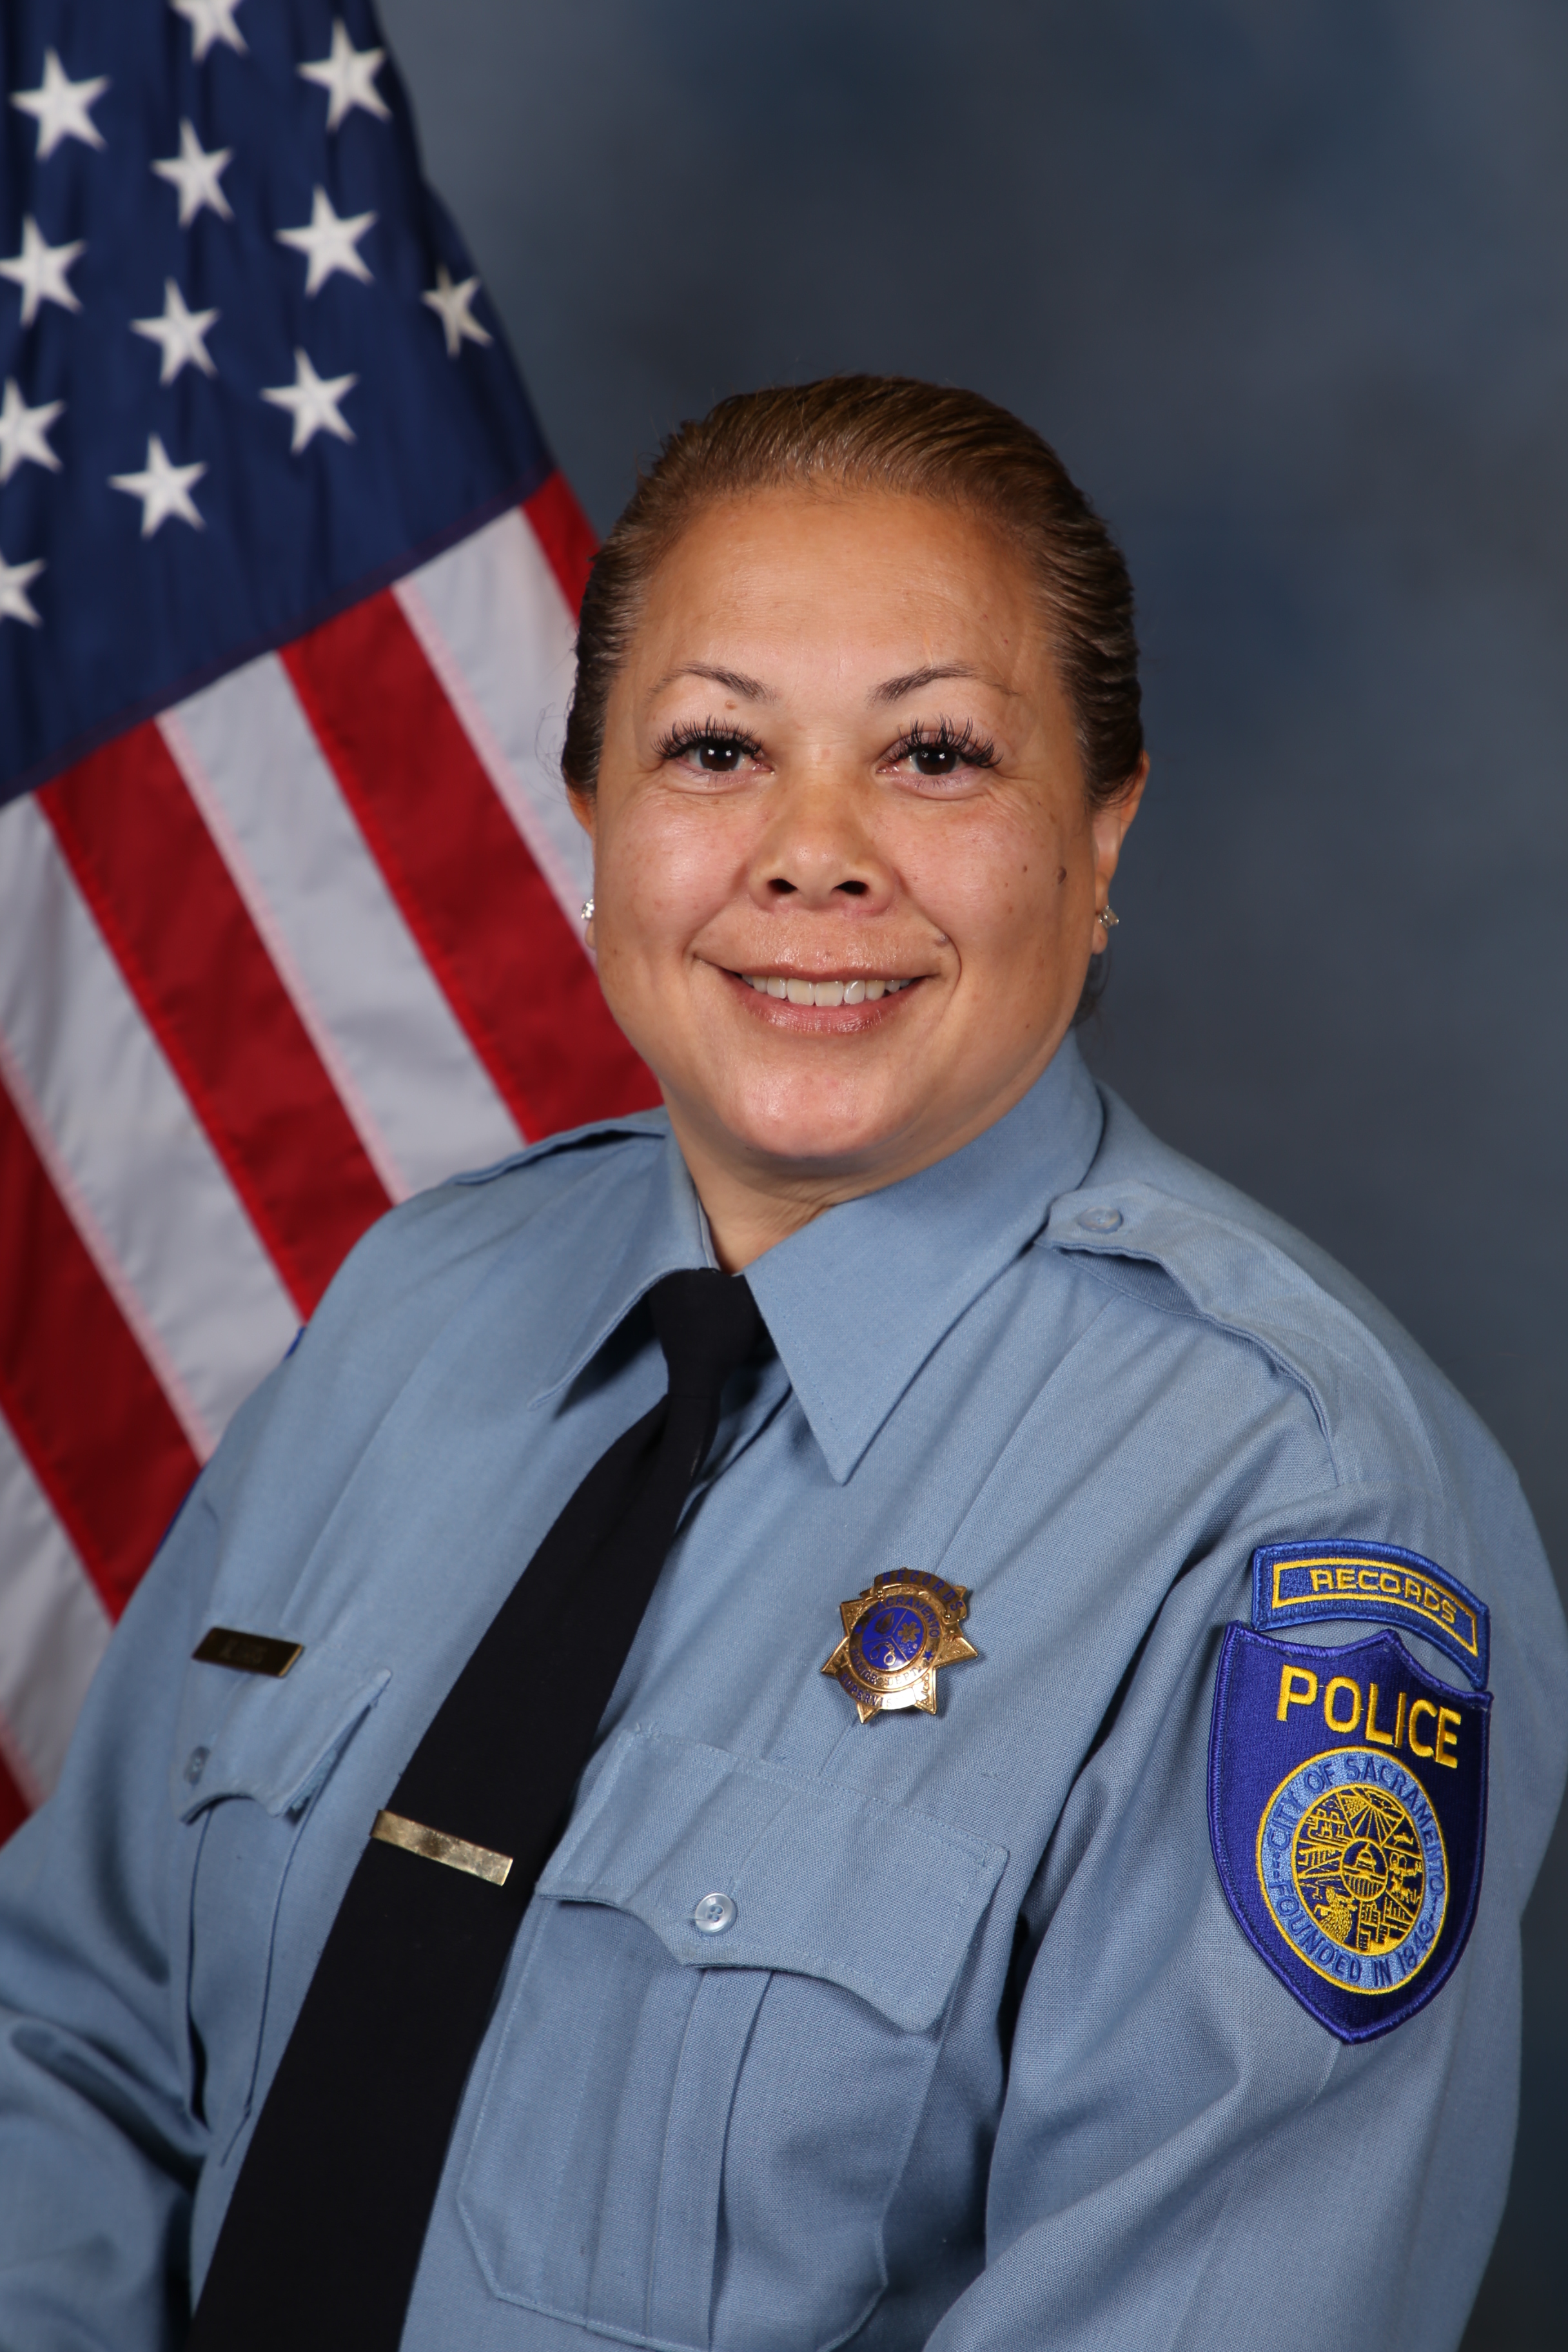 Photo of Michelle Bays in uniform standing in front of the American flag.